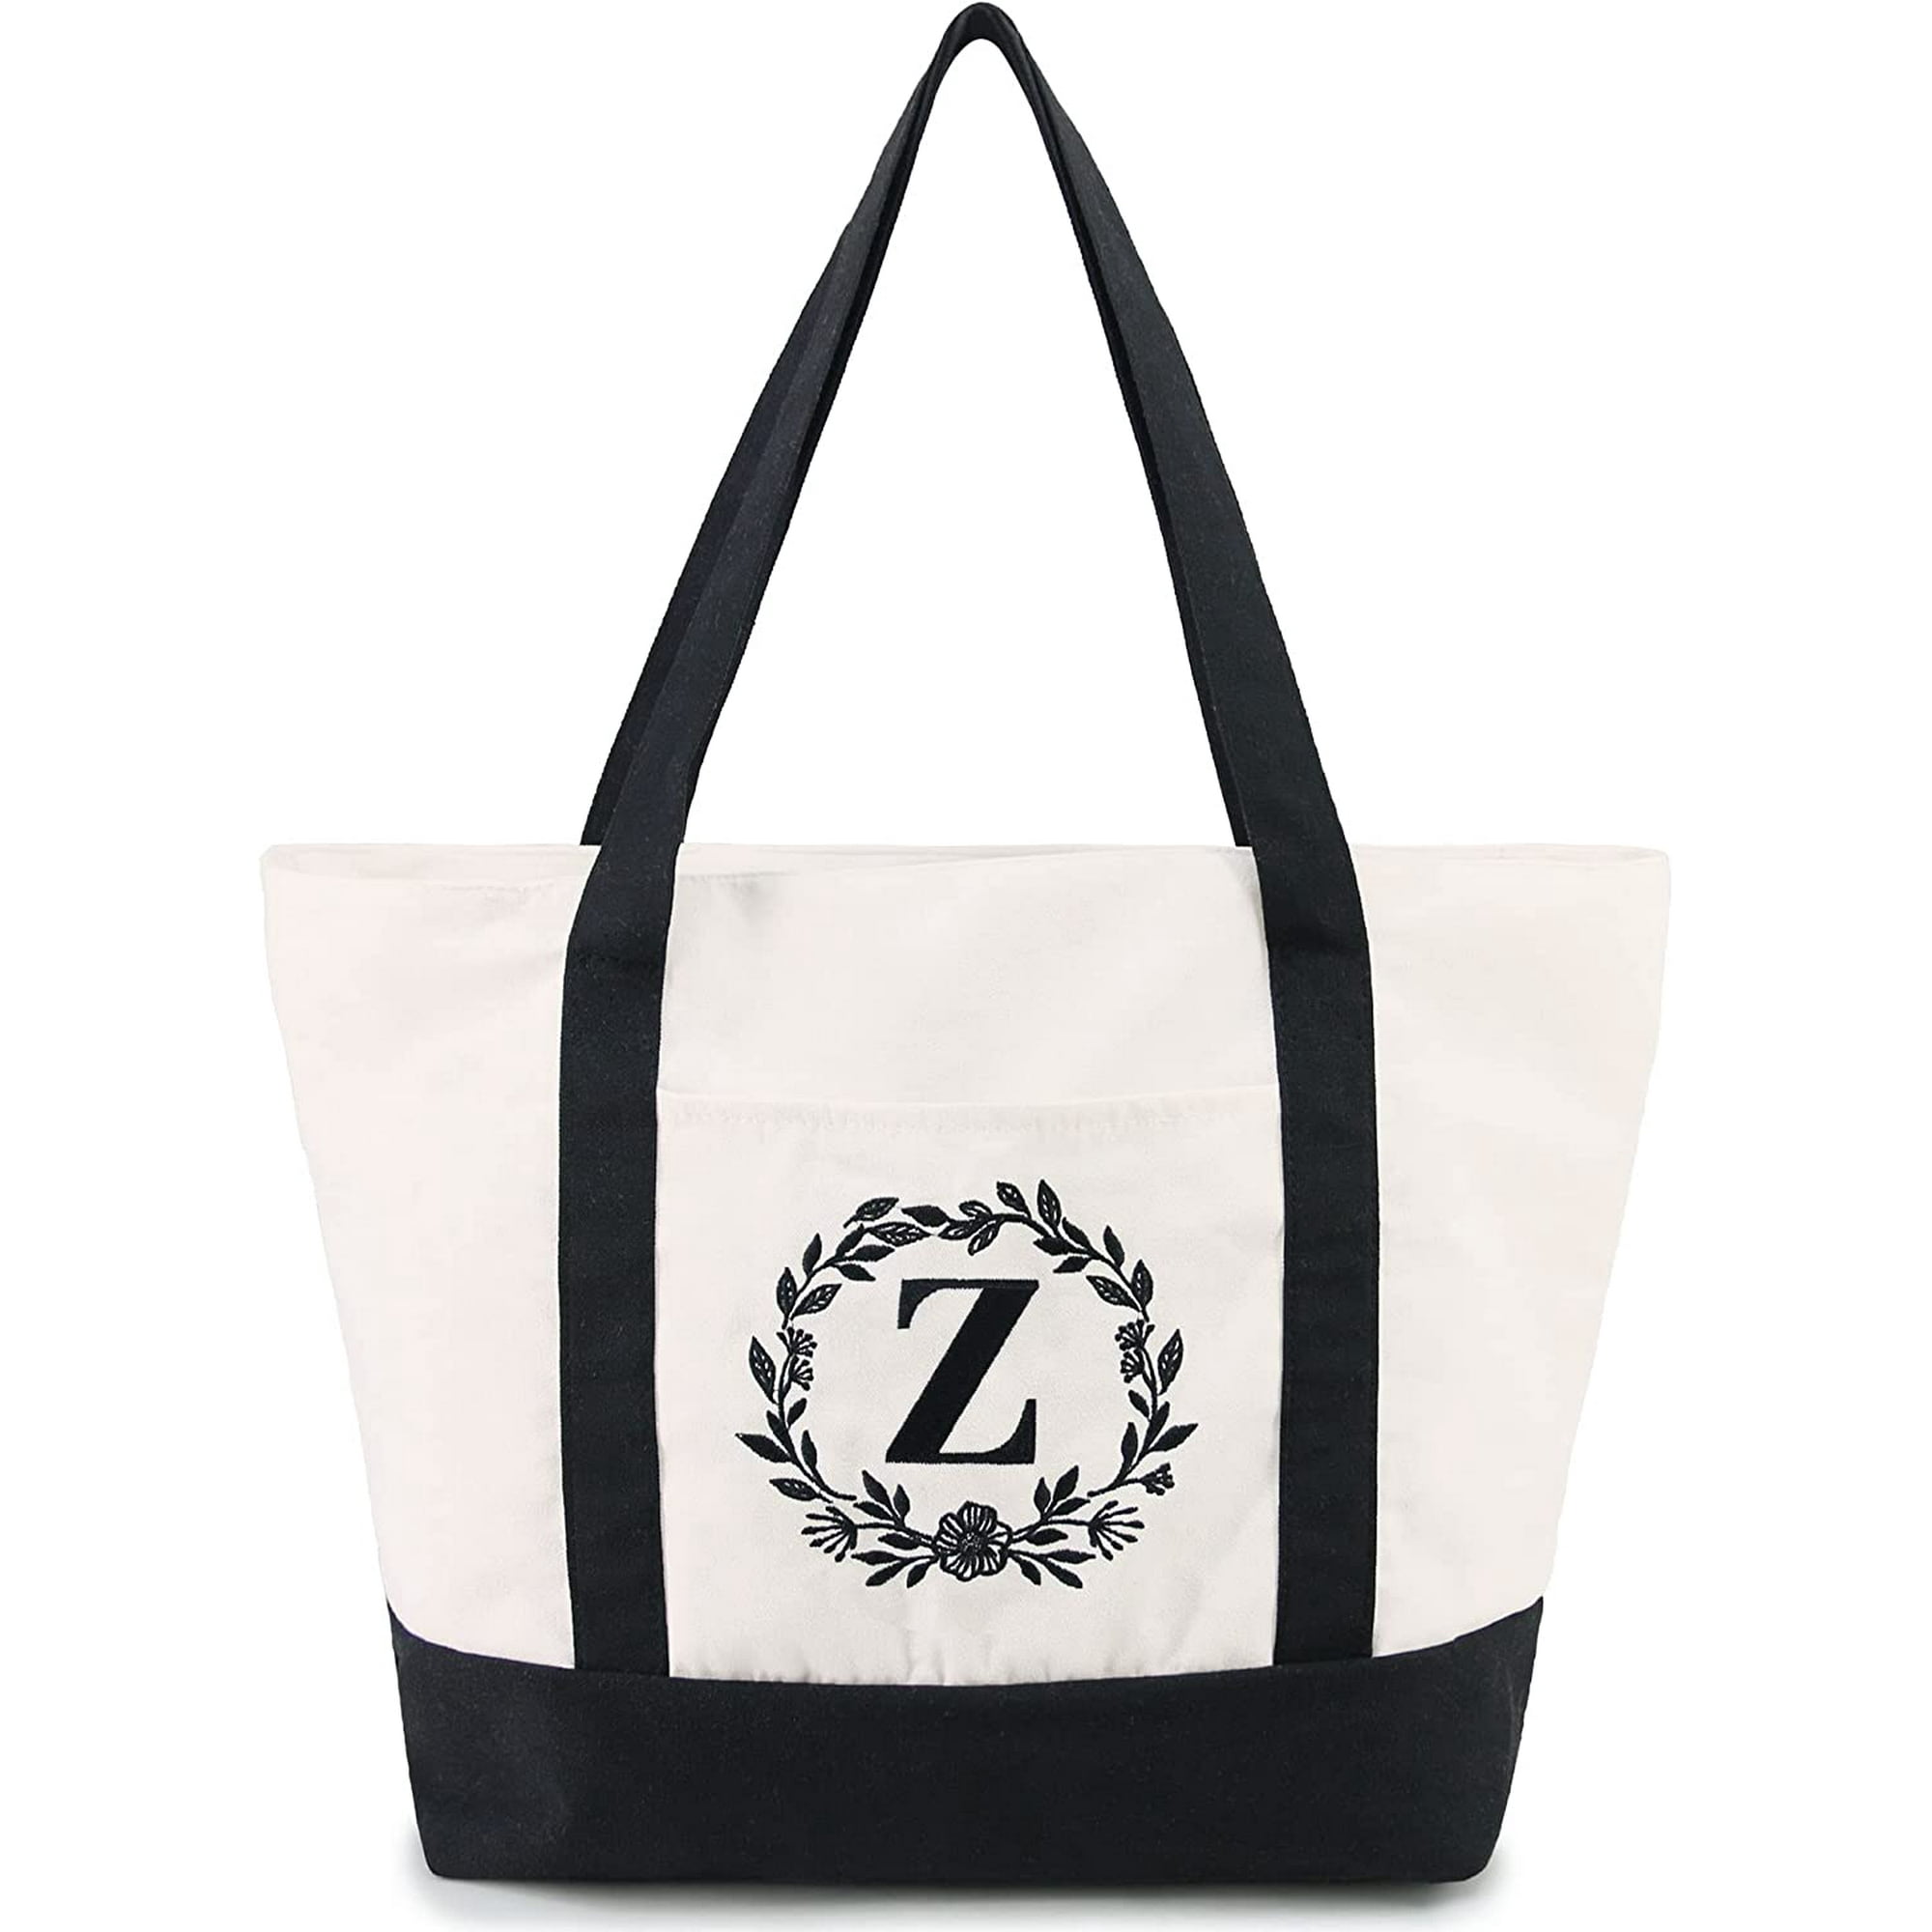 Initial Canvas Tote Bag, Personalized Present Bag, Gift Bag